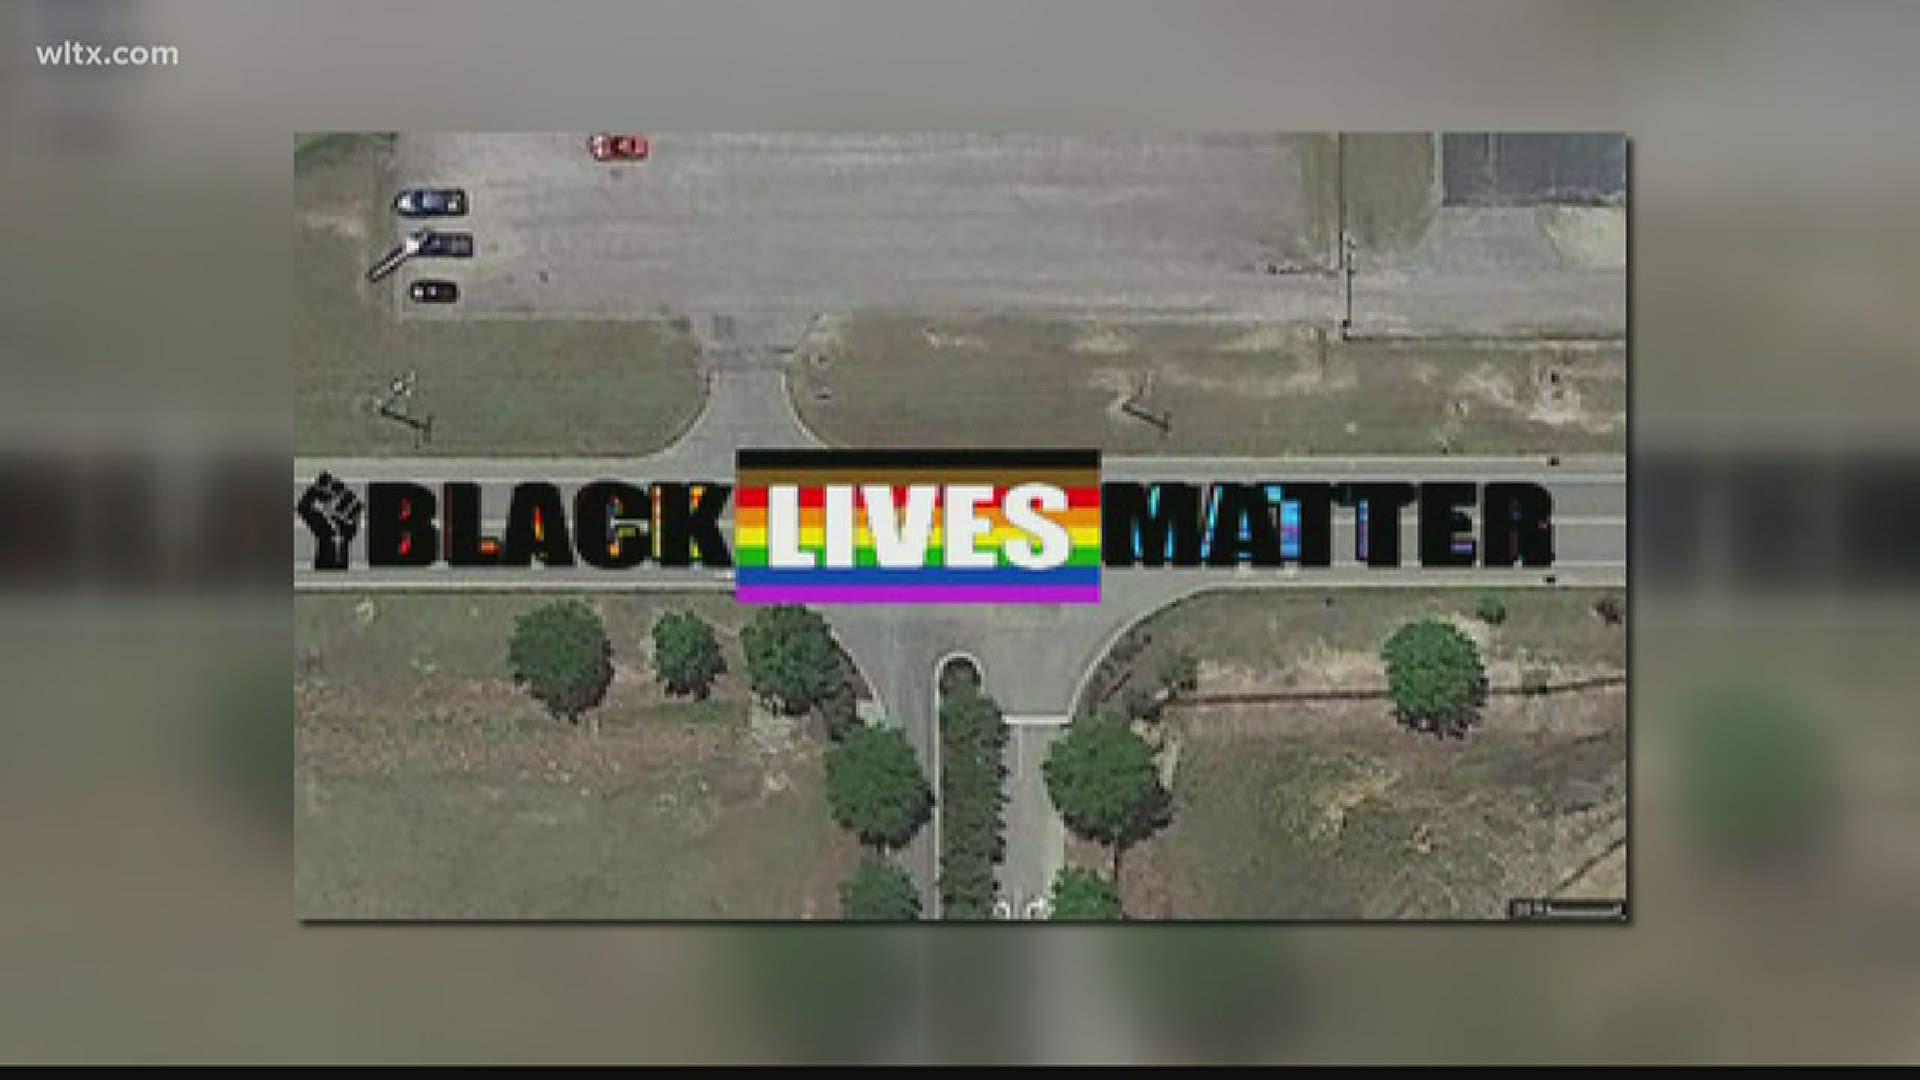 Organizers are hoping to paint "Black Lives Matter" on a street in the Rosewood area.